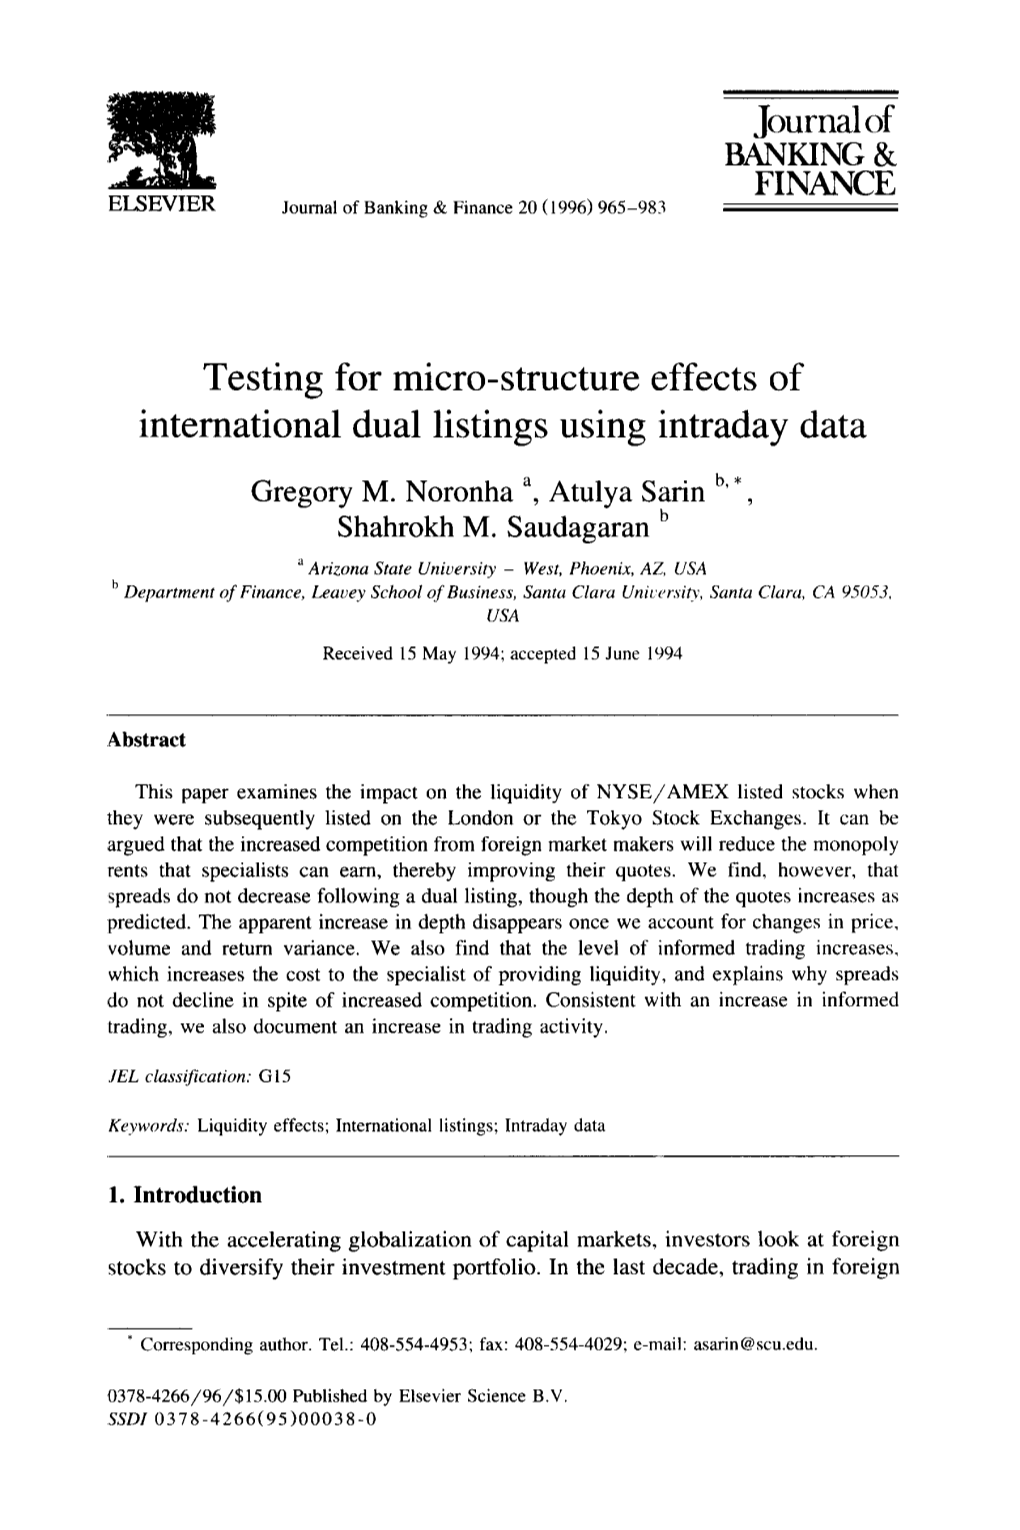 Journalof Testing for Micro-Structure Effects of International Dual Listings